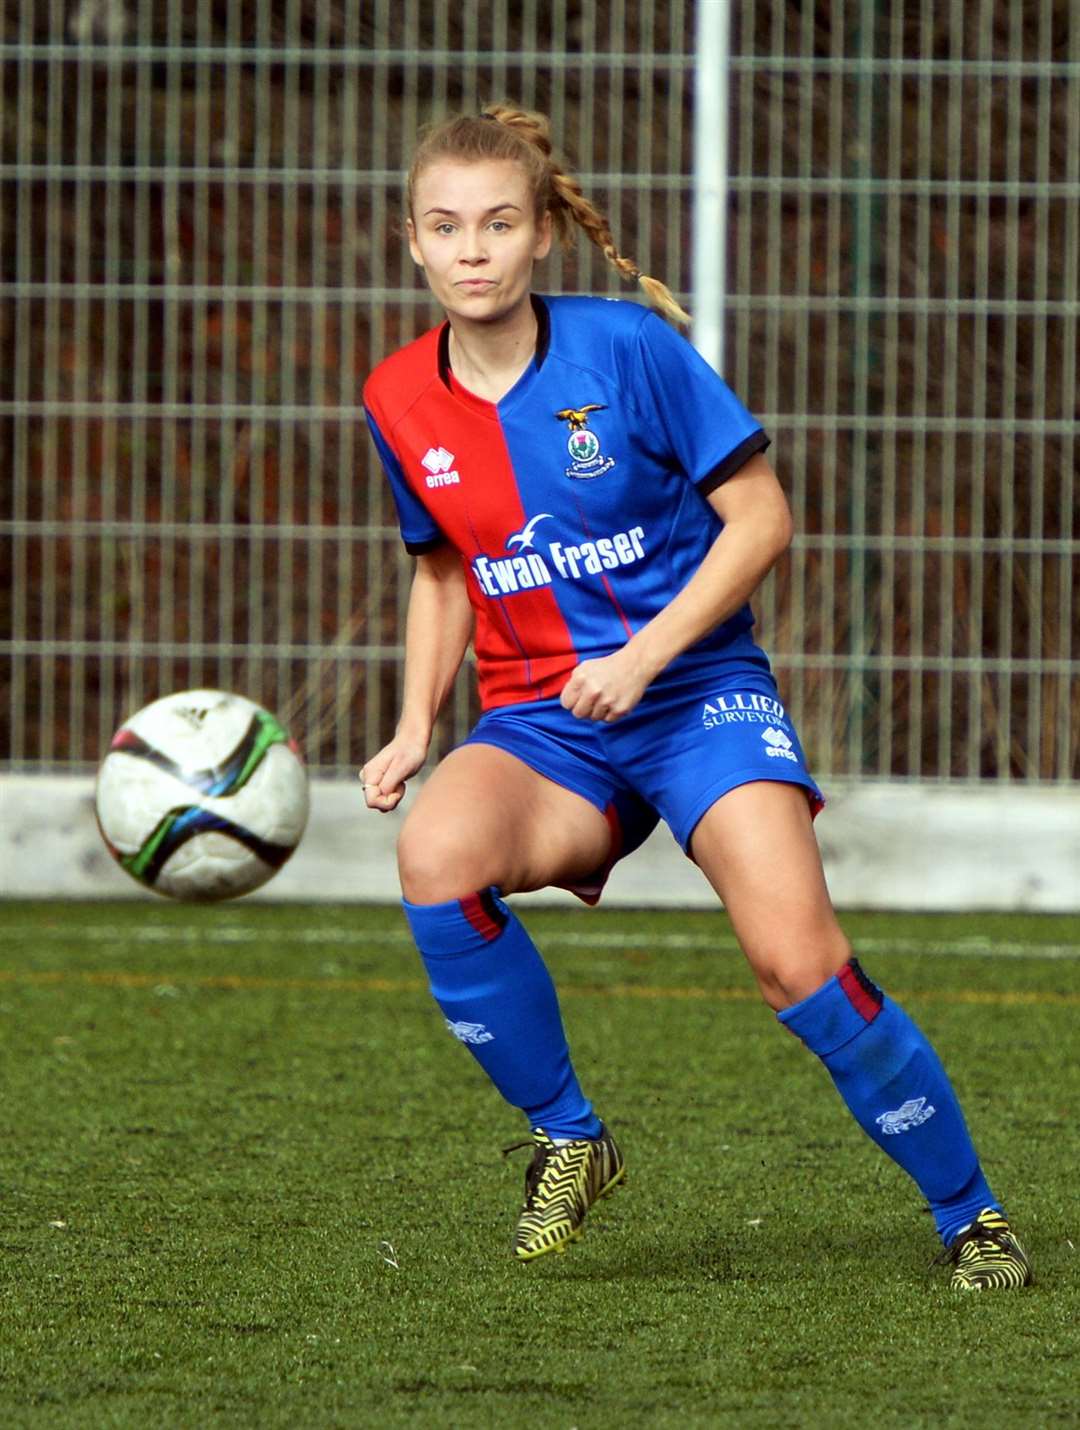 Inverness Caledonian Thistle's Janette Janatuinen scored in the win over Stonehaven. Picture: Gair Fraser. Image No.043496.